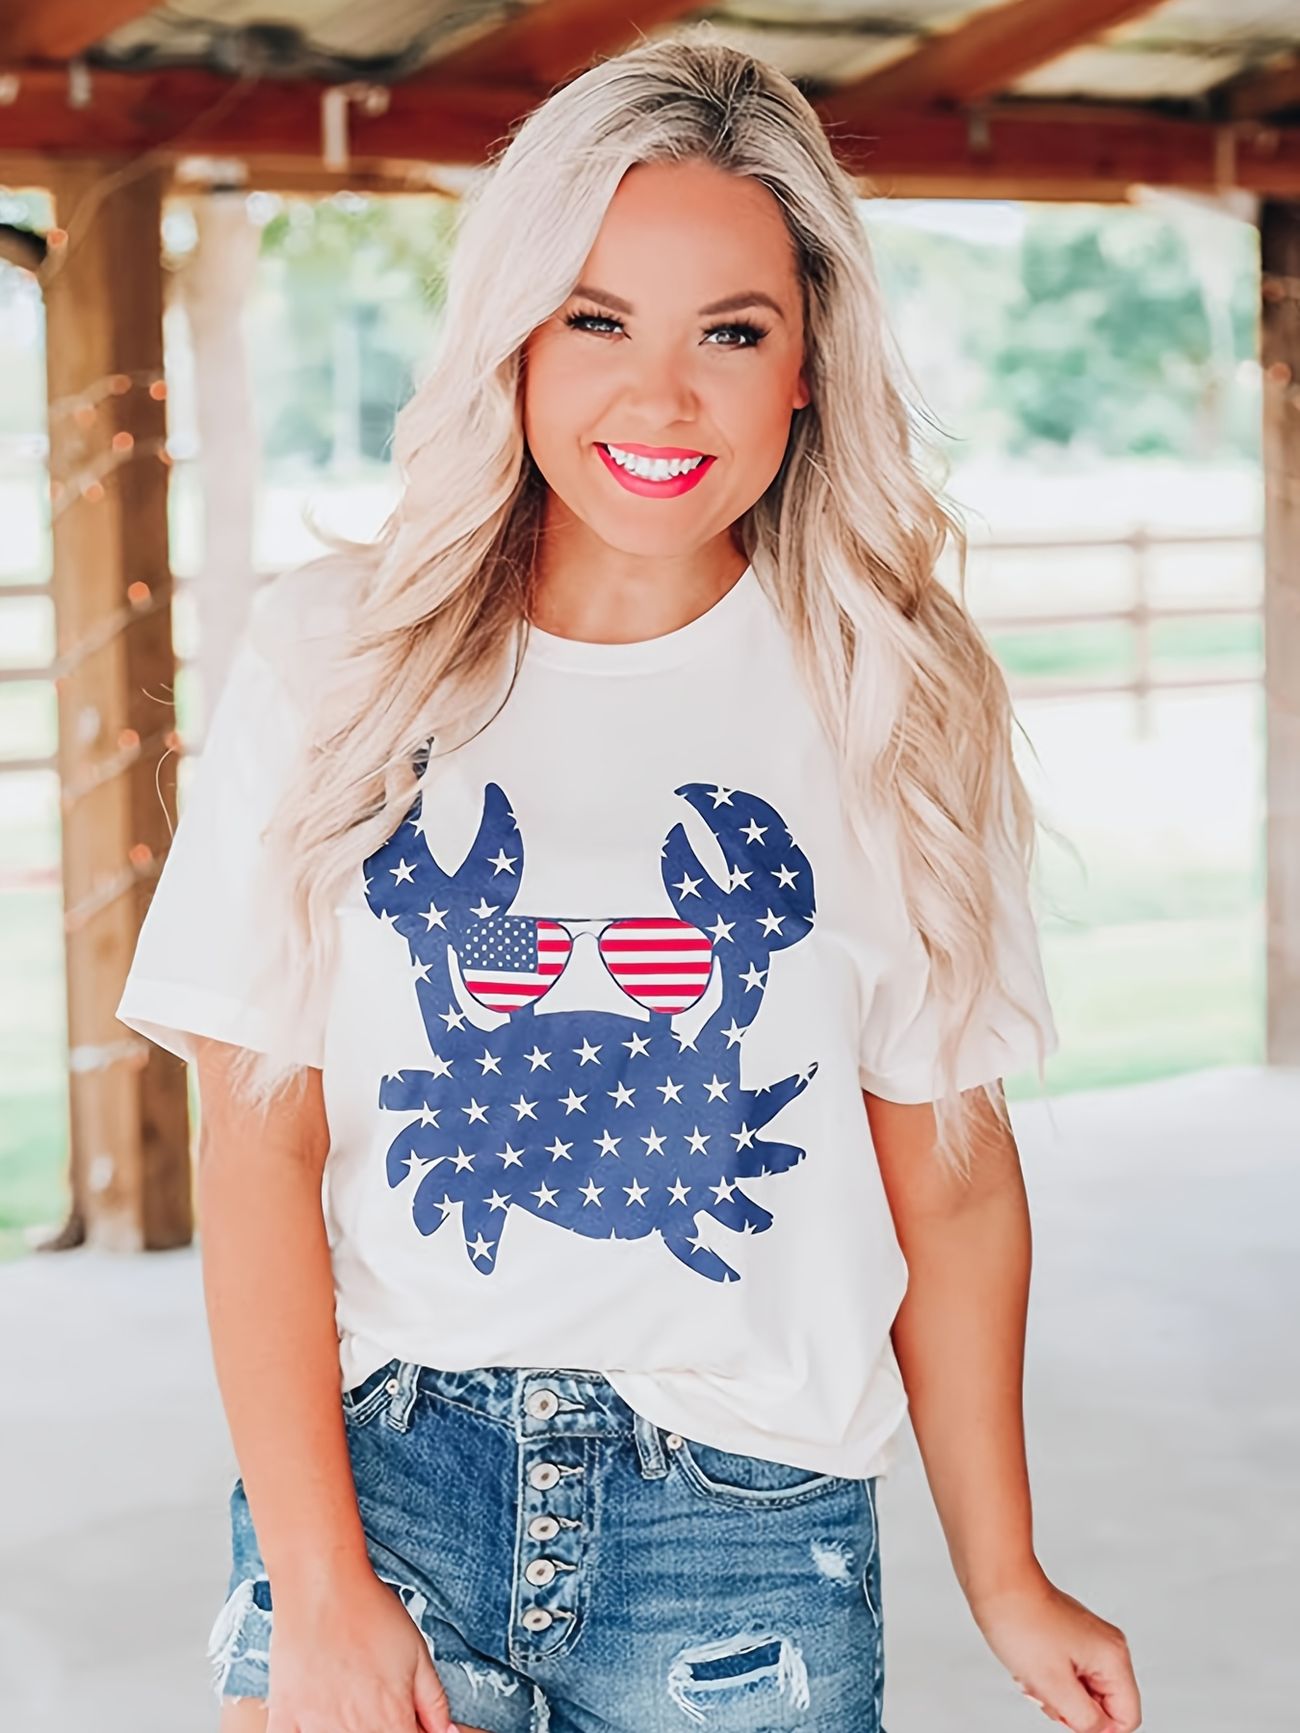 FREE & FAST Shipping Featured products S W C T Tops T A Flag P S S T-S C T  Tees L Fit C B W's C Tax-Free Free Shipping oltrans.bg